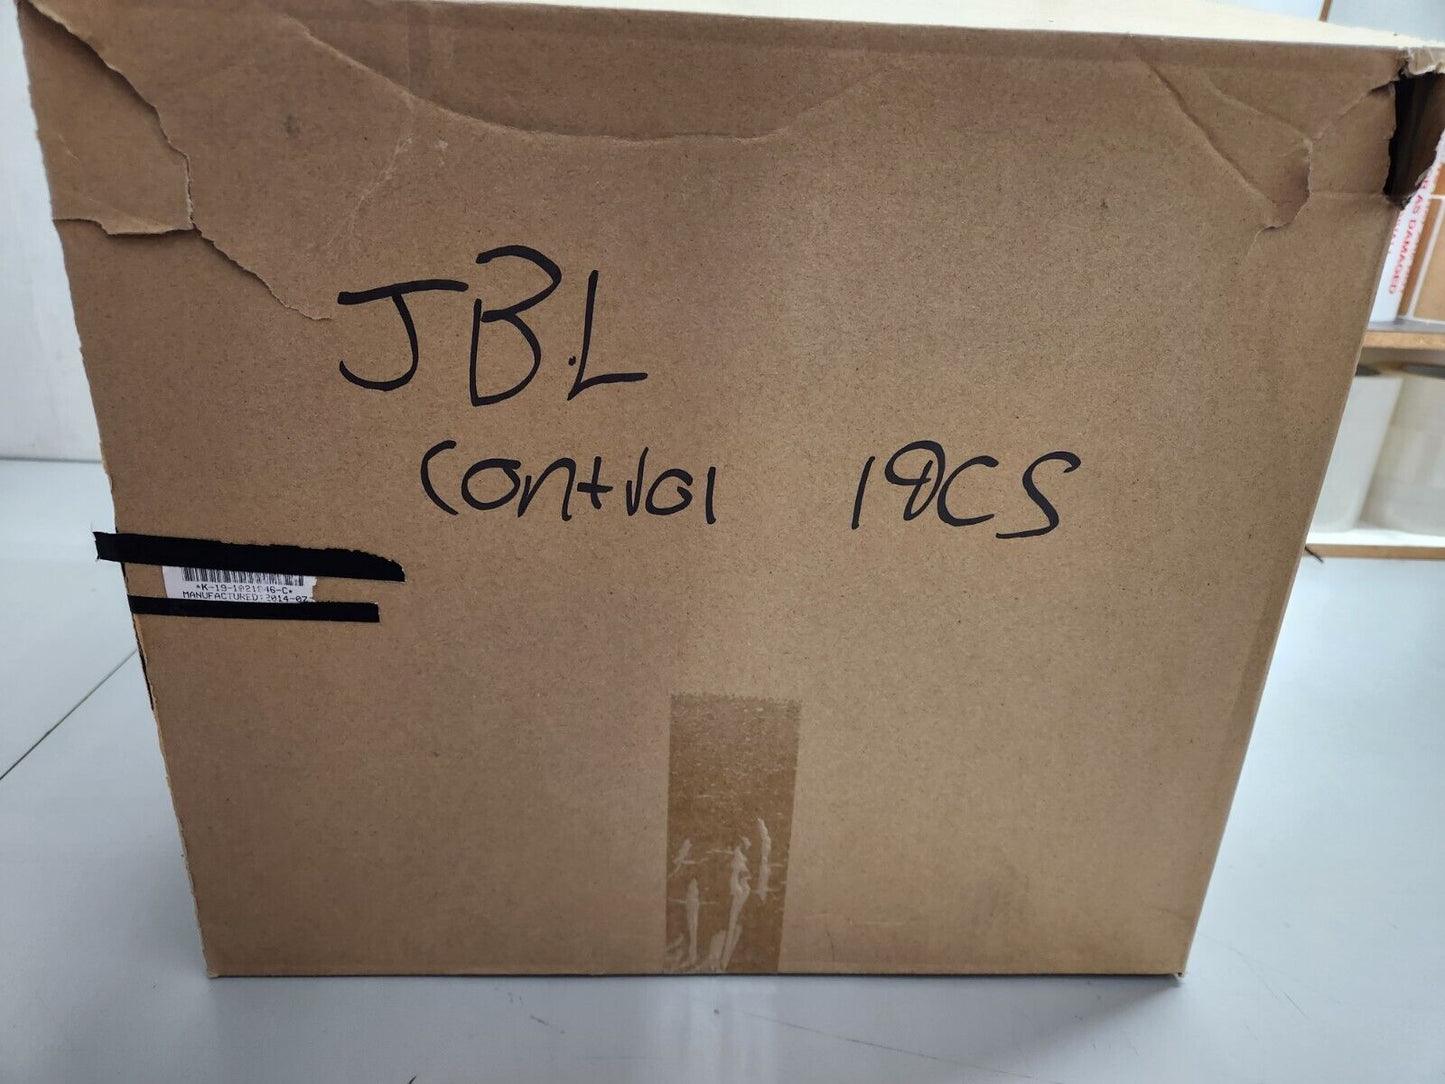 JBL Control 19CS 8" 200W In-Ceiling 8-Ohm Installation Subwoofer Single White